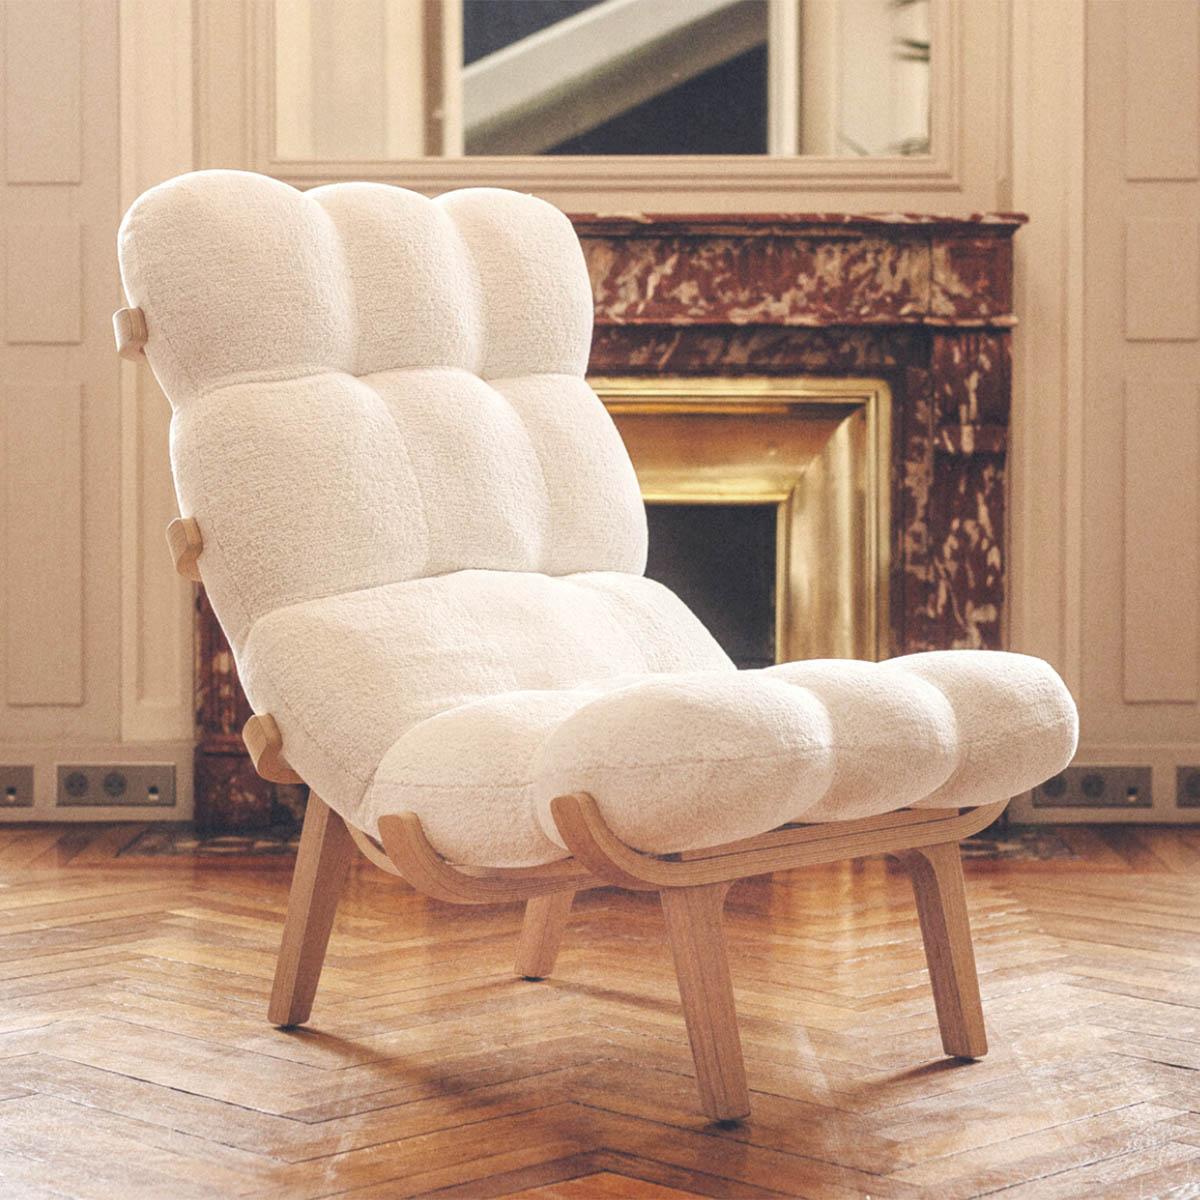 Hand-Crafted Cloudy Armchair For Sale